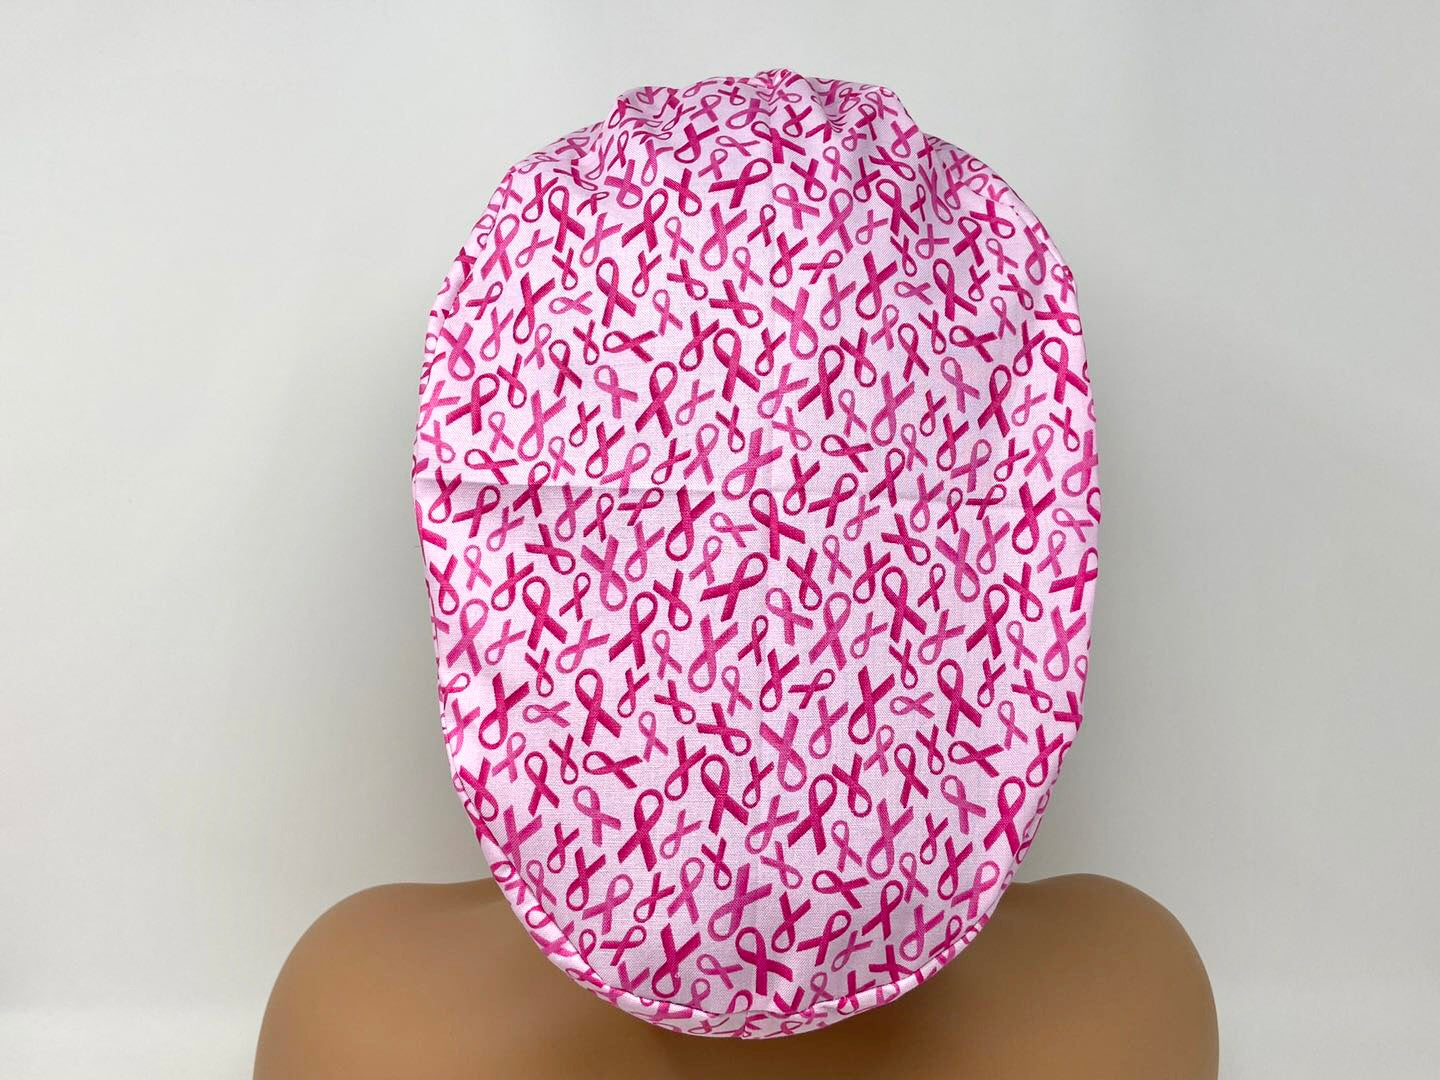 Breast Cancer Pink Ribbons - Ponytail